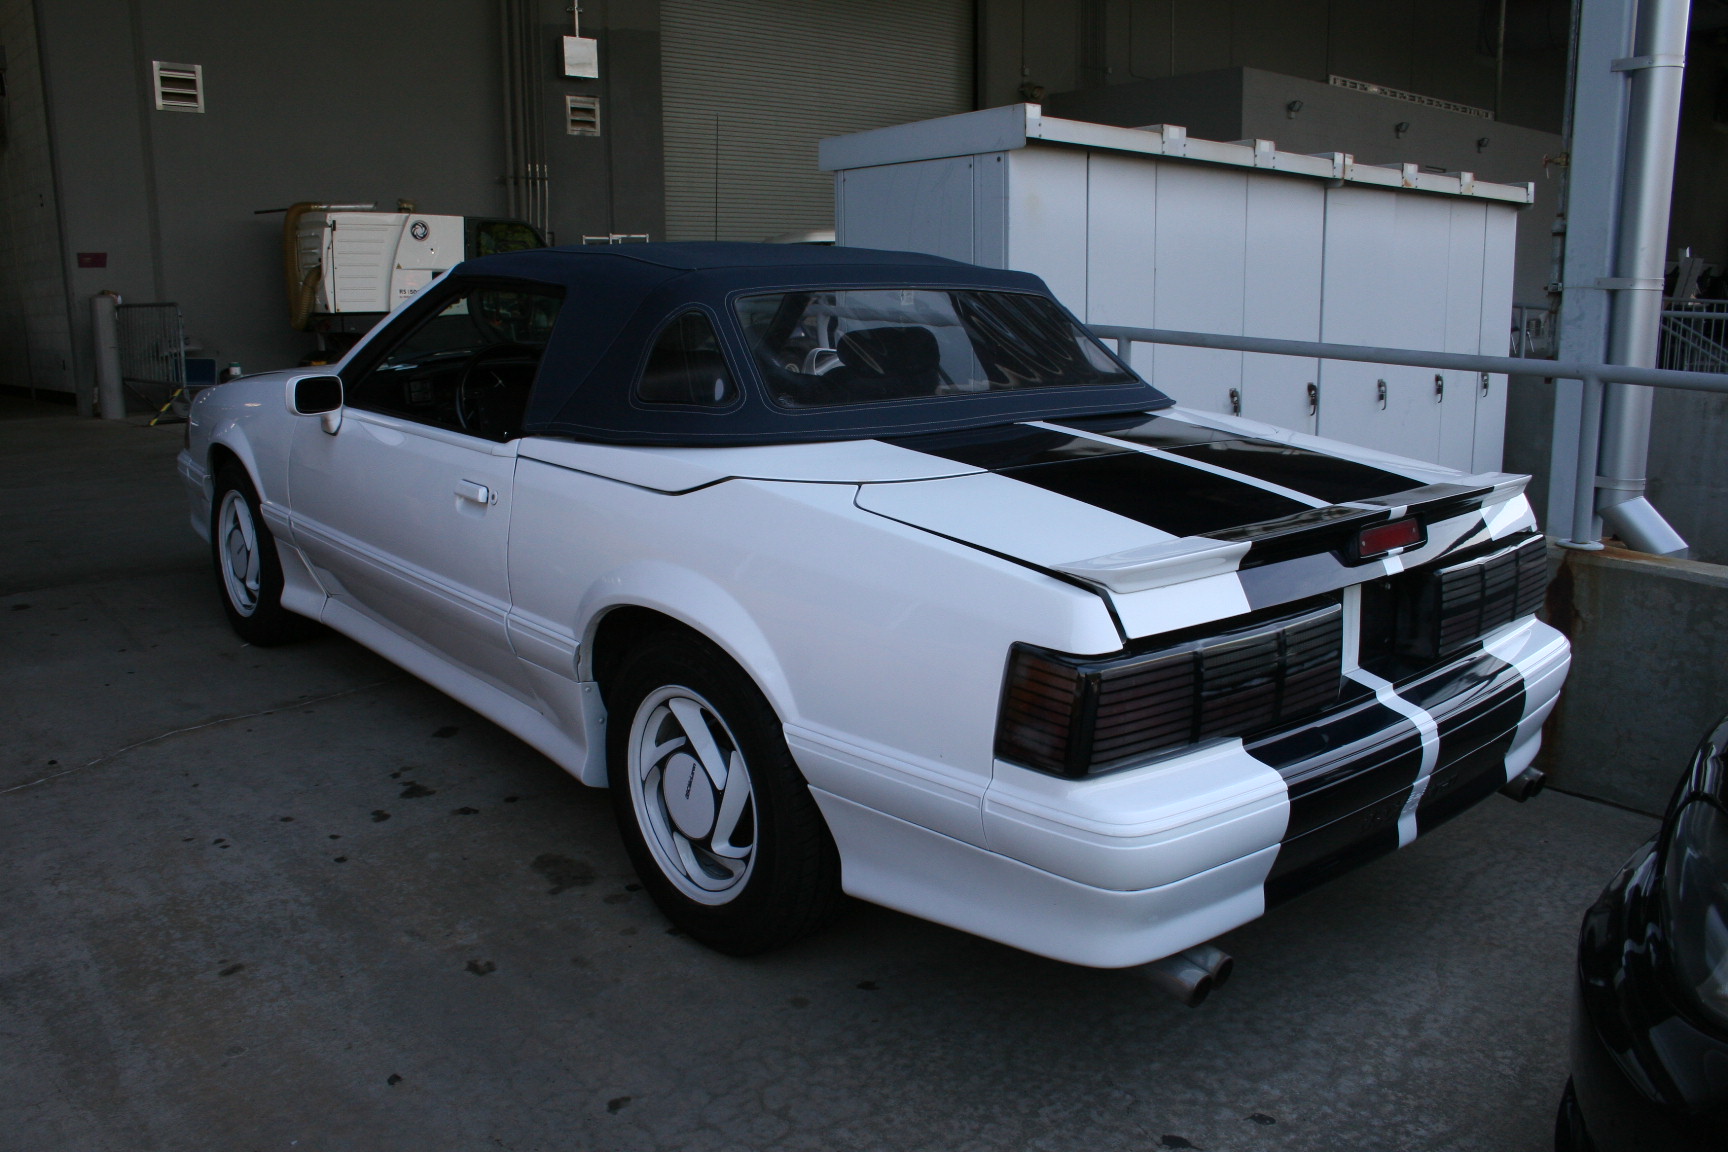 7th Image of a 1990 FORD MCLAREN MUSTANG